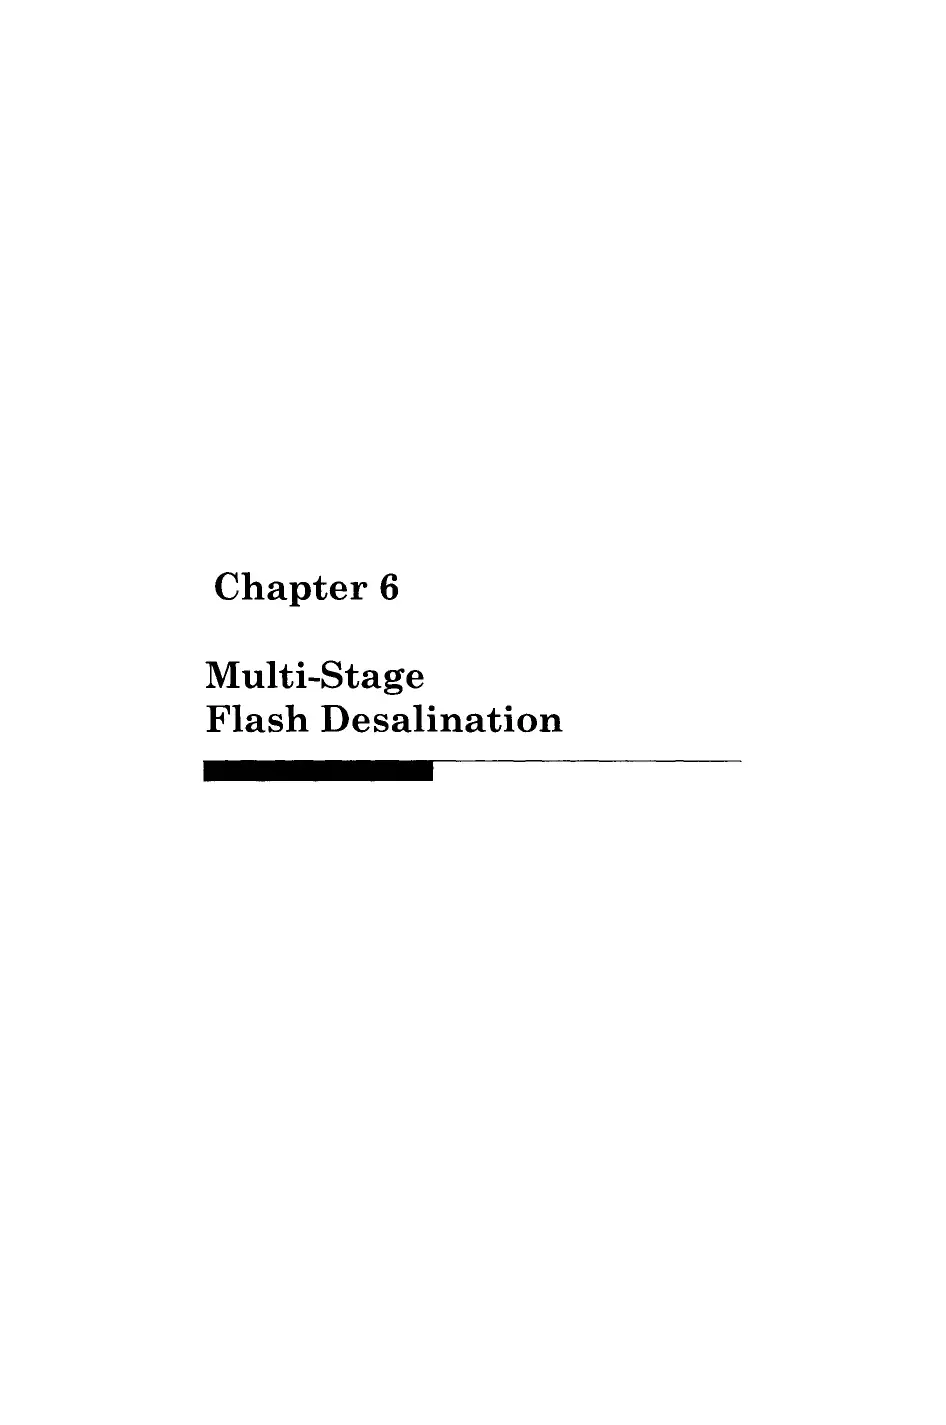 Chapter 6 Multi-stage Flash Desalination